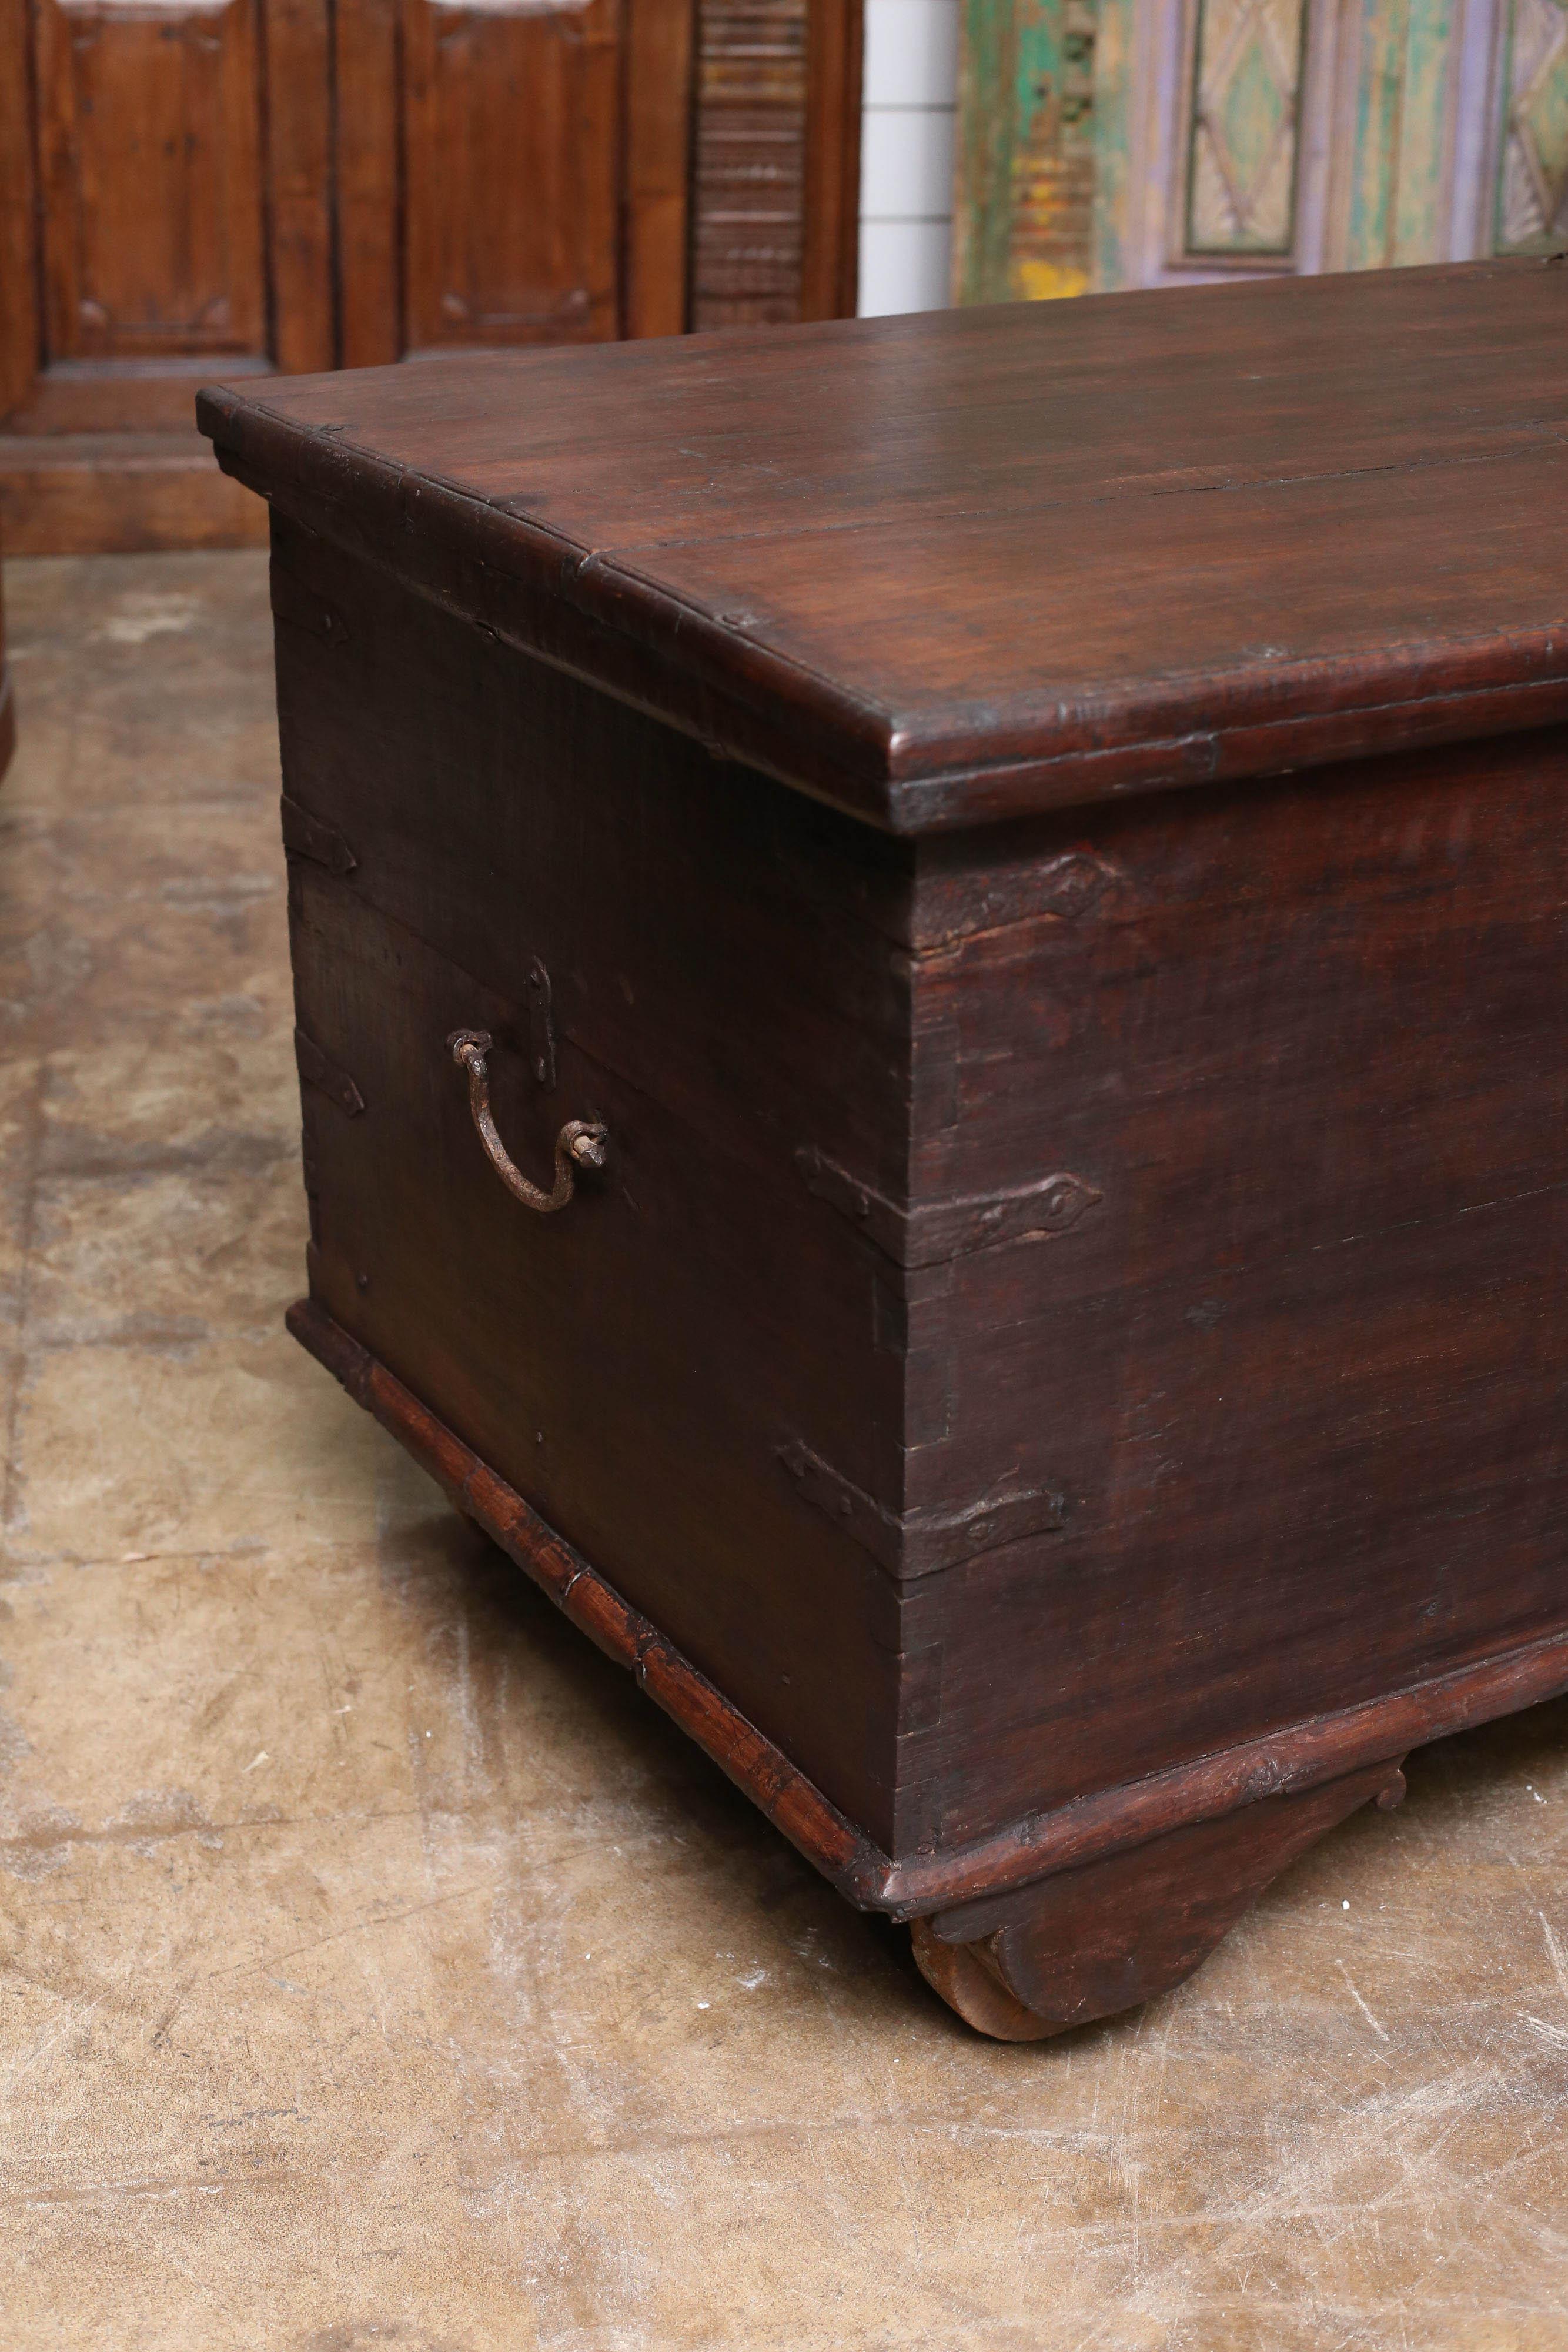 This 1810s solid teak wood superbly crafted dowry chest comes from the holy town of Varanasi in central India. Consistent with the times it was made the box is fitted with wooden wheels. This investment quality chest has stood the test of times.